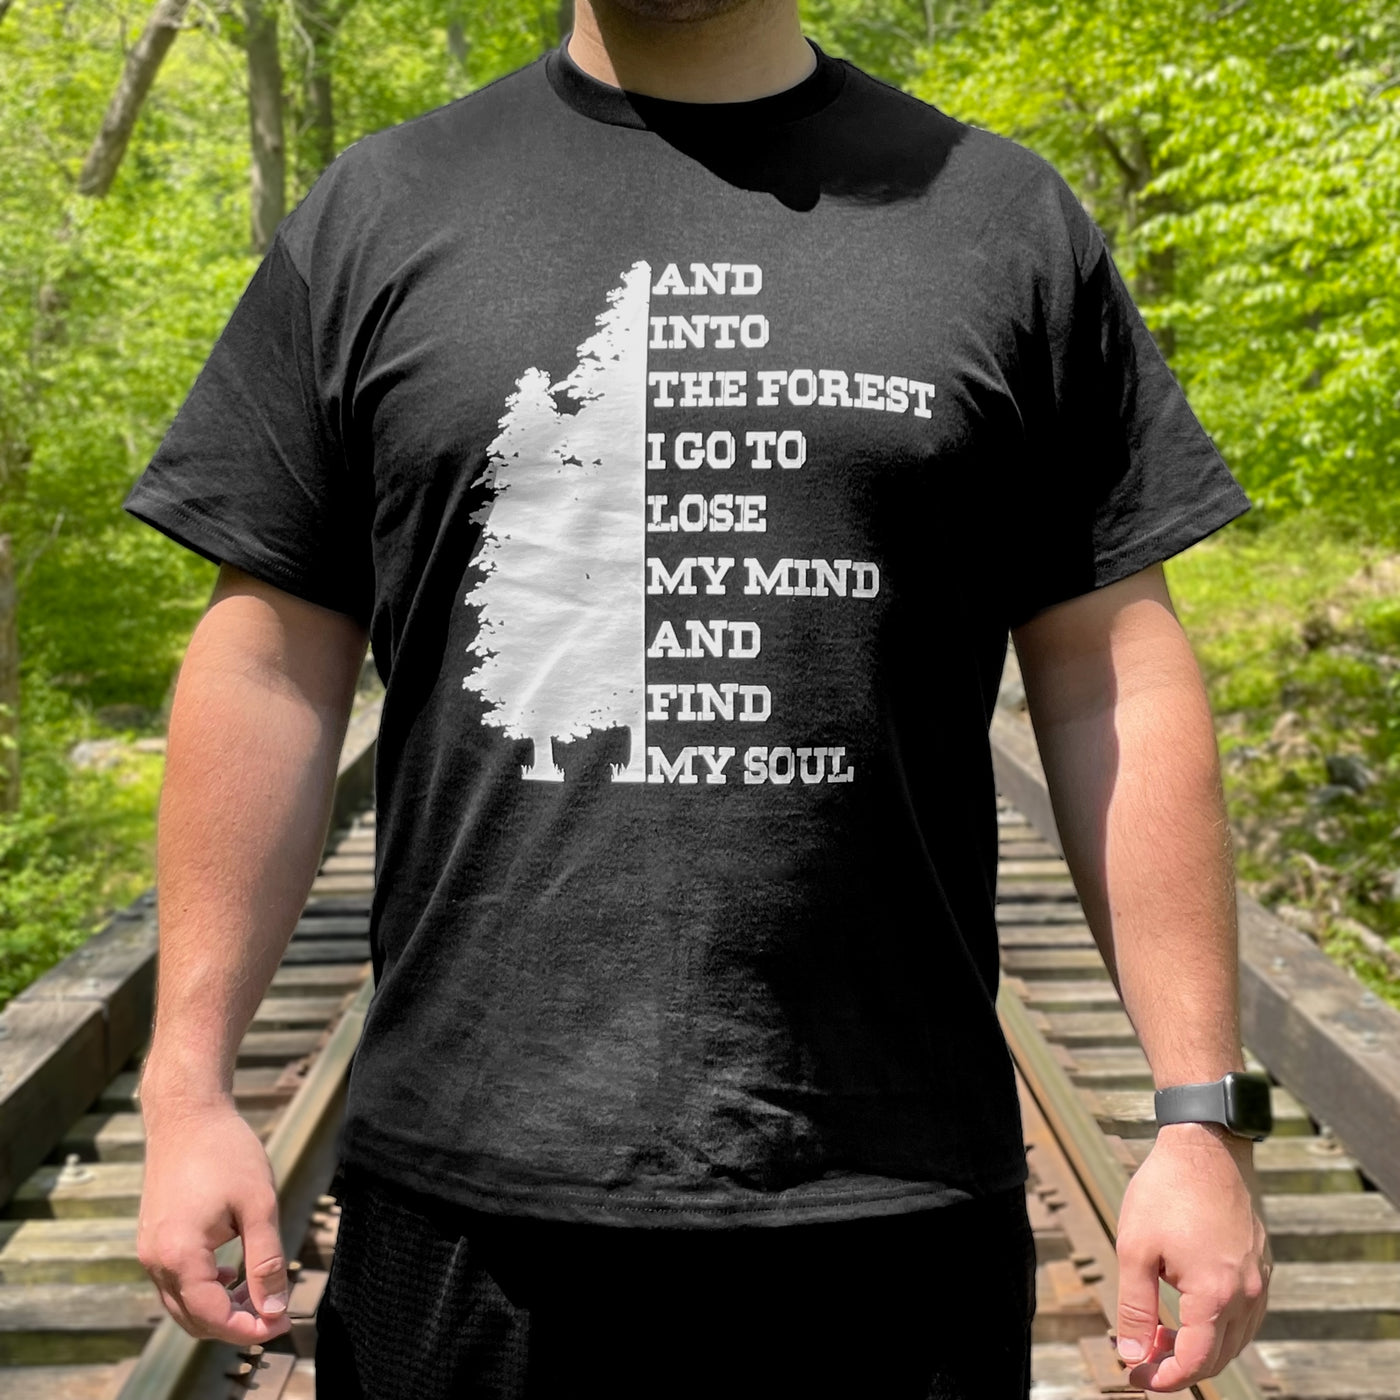 Into the Forest Pine T-Shirt